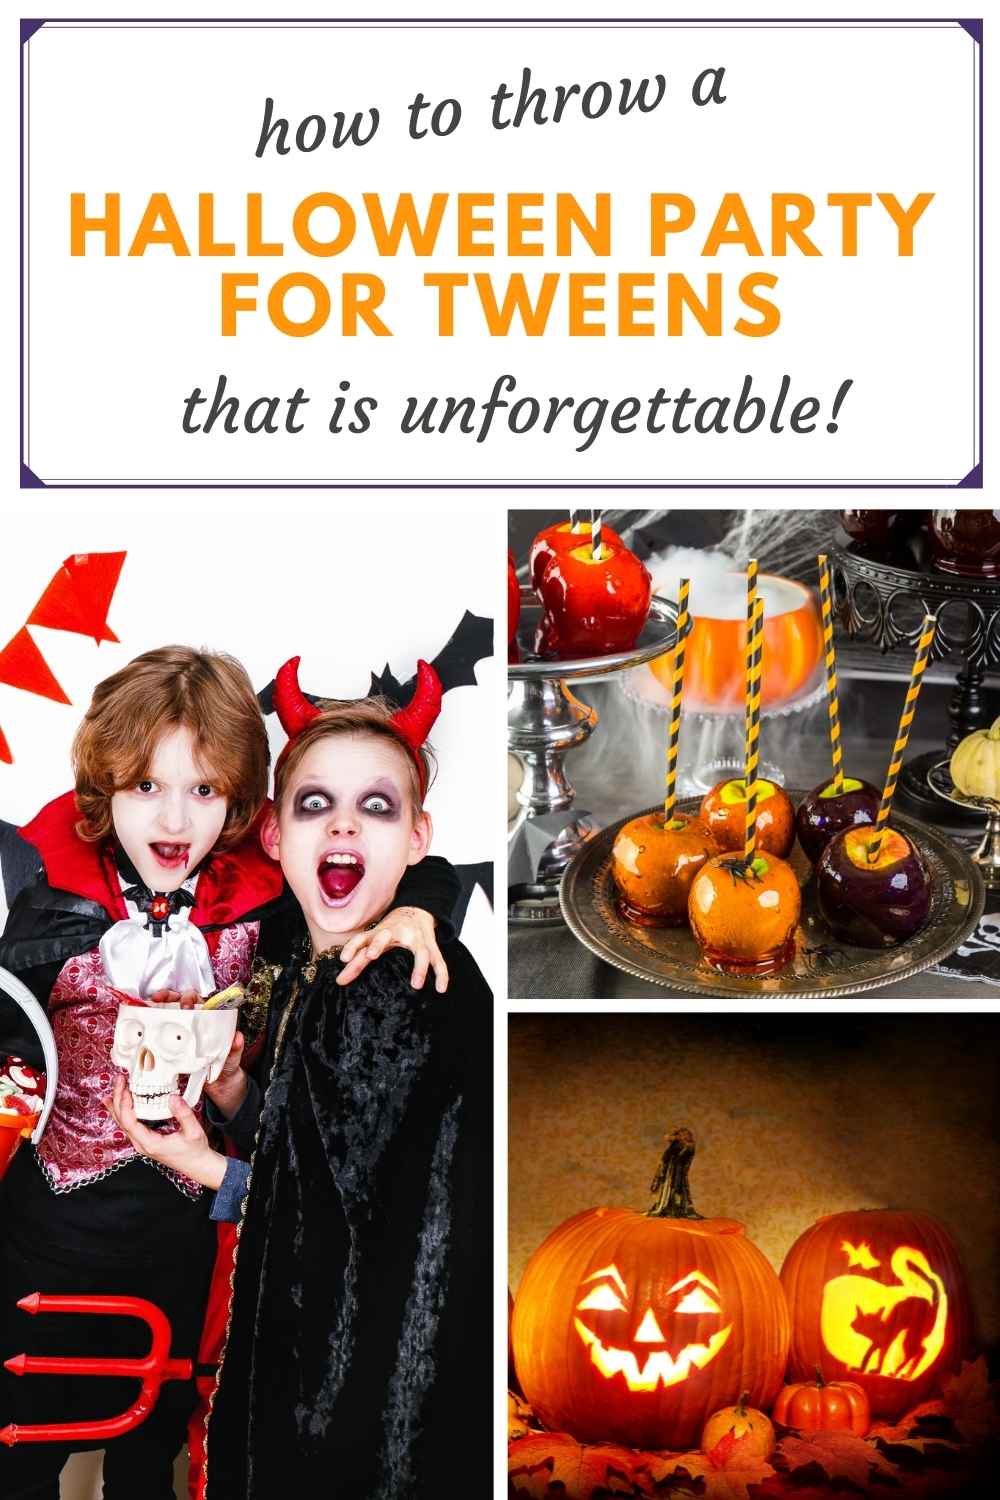 Unforgettable Halloween Party Ideas For Tweens & Teens | A Reinvented Mom